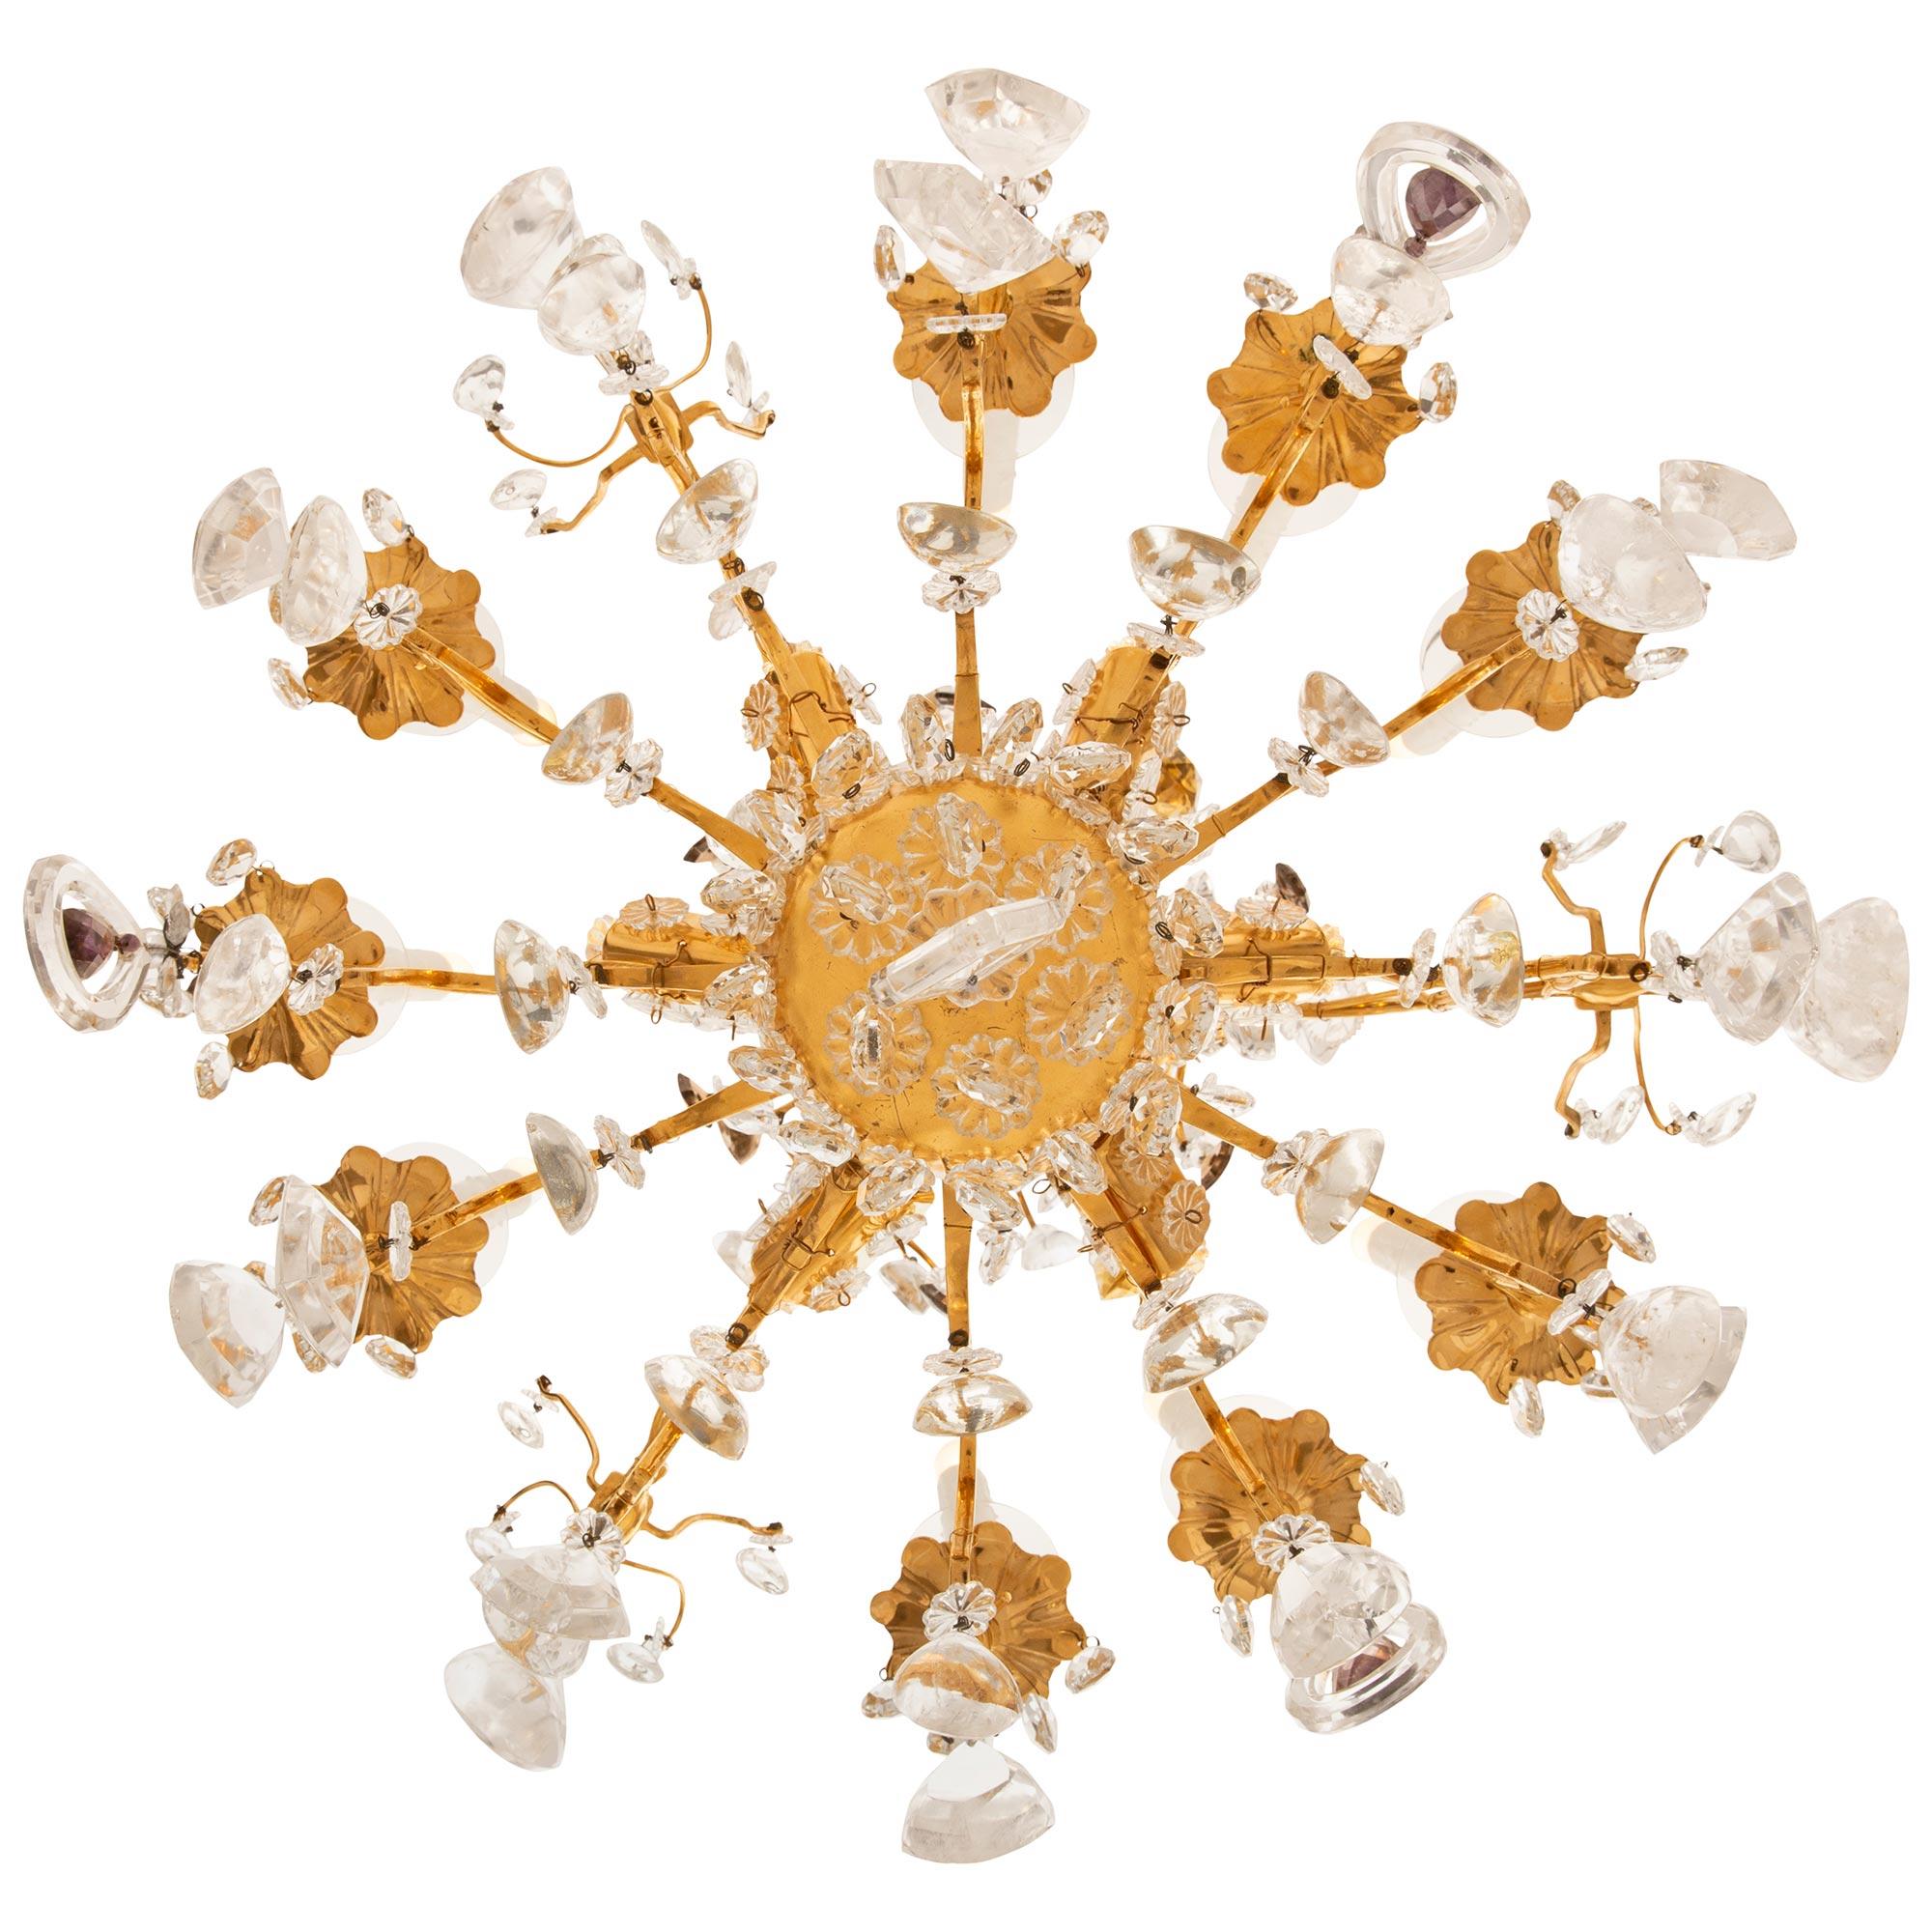 A lovely and uniquely detailed French 19th century Louis XV st. Ormolu, Crystal and Rock Crystal chandelier. This nine arm, eighteen light chandelier is centered by a most decorative pierced diamond shaped Crystal with a central tear drop. Above the